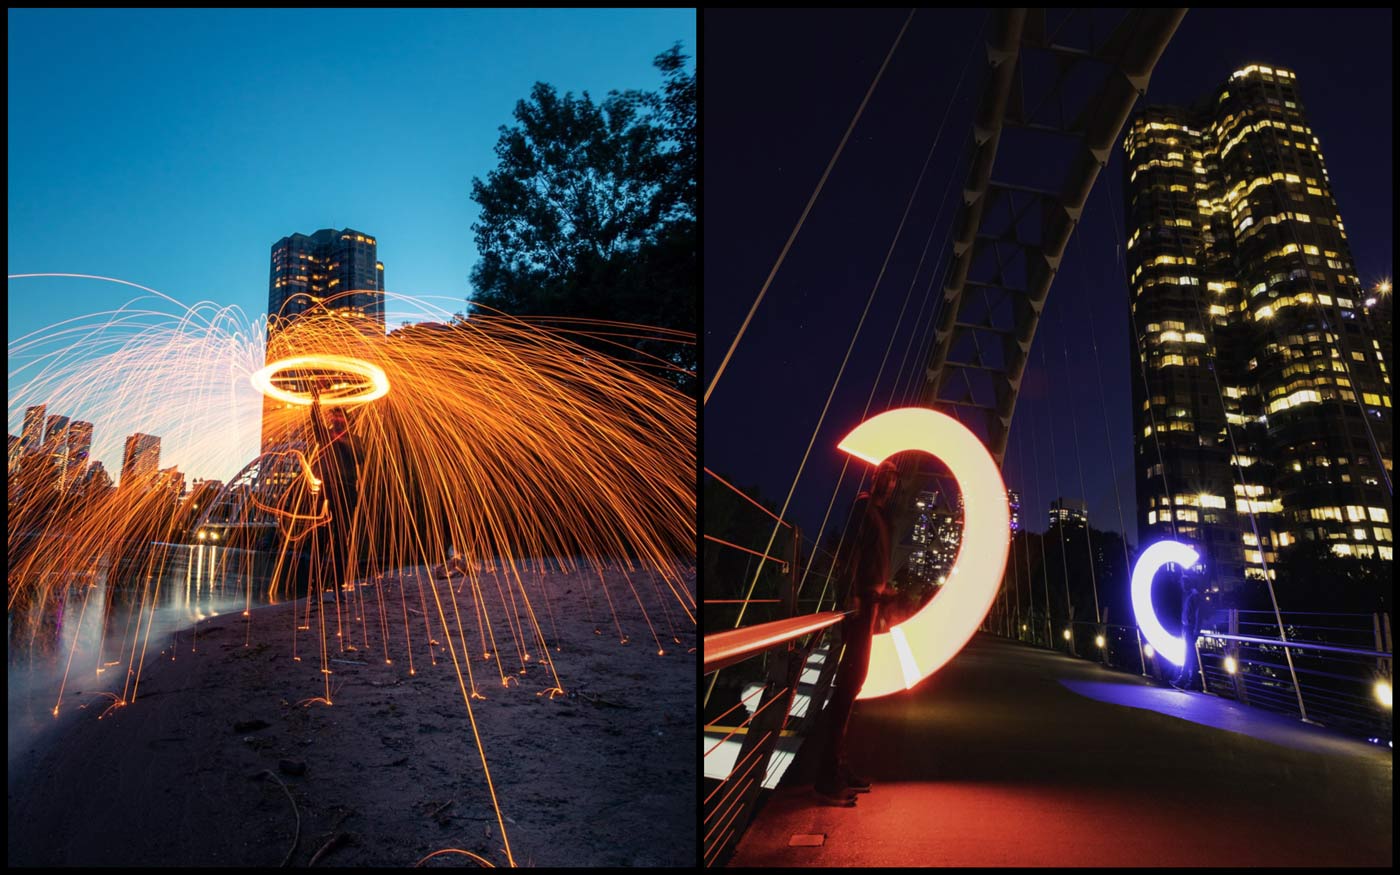 Night Photography and Long Exposure Workshop with Tdot Shots at Cherry Beach and the Toronto Port Lands